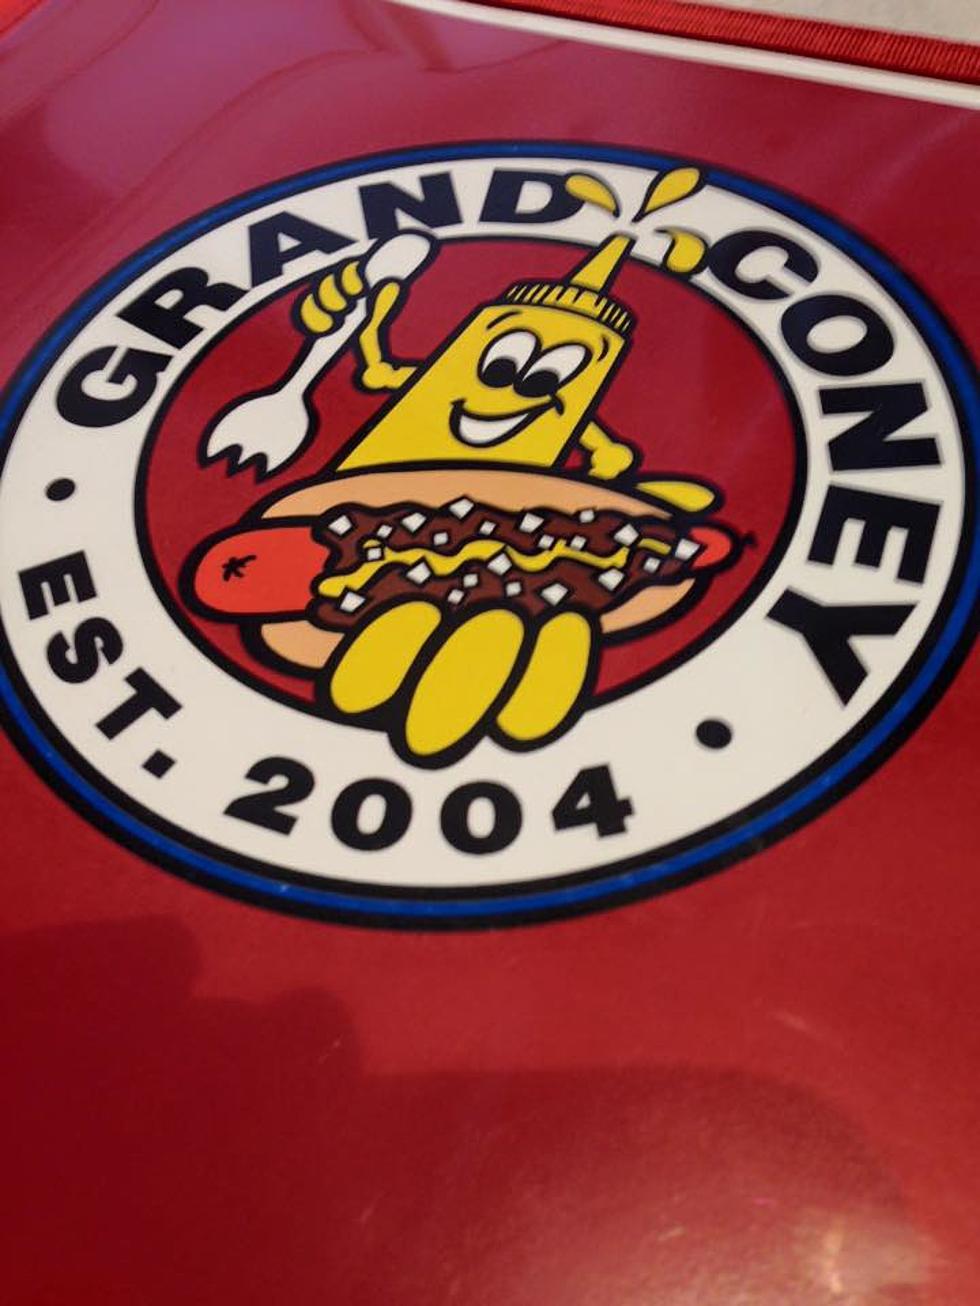 Grand Coney’s 28th Street Location Grand Opening Is Soon!